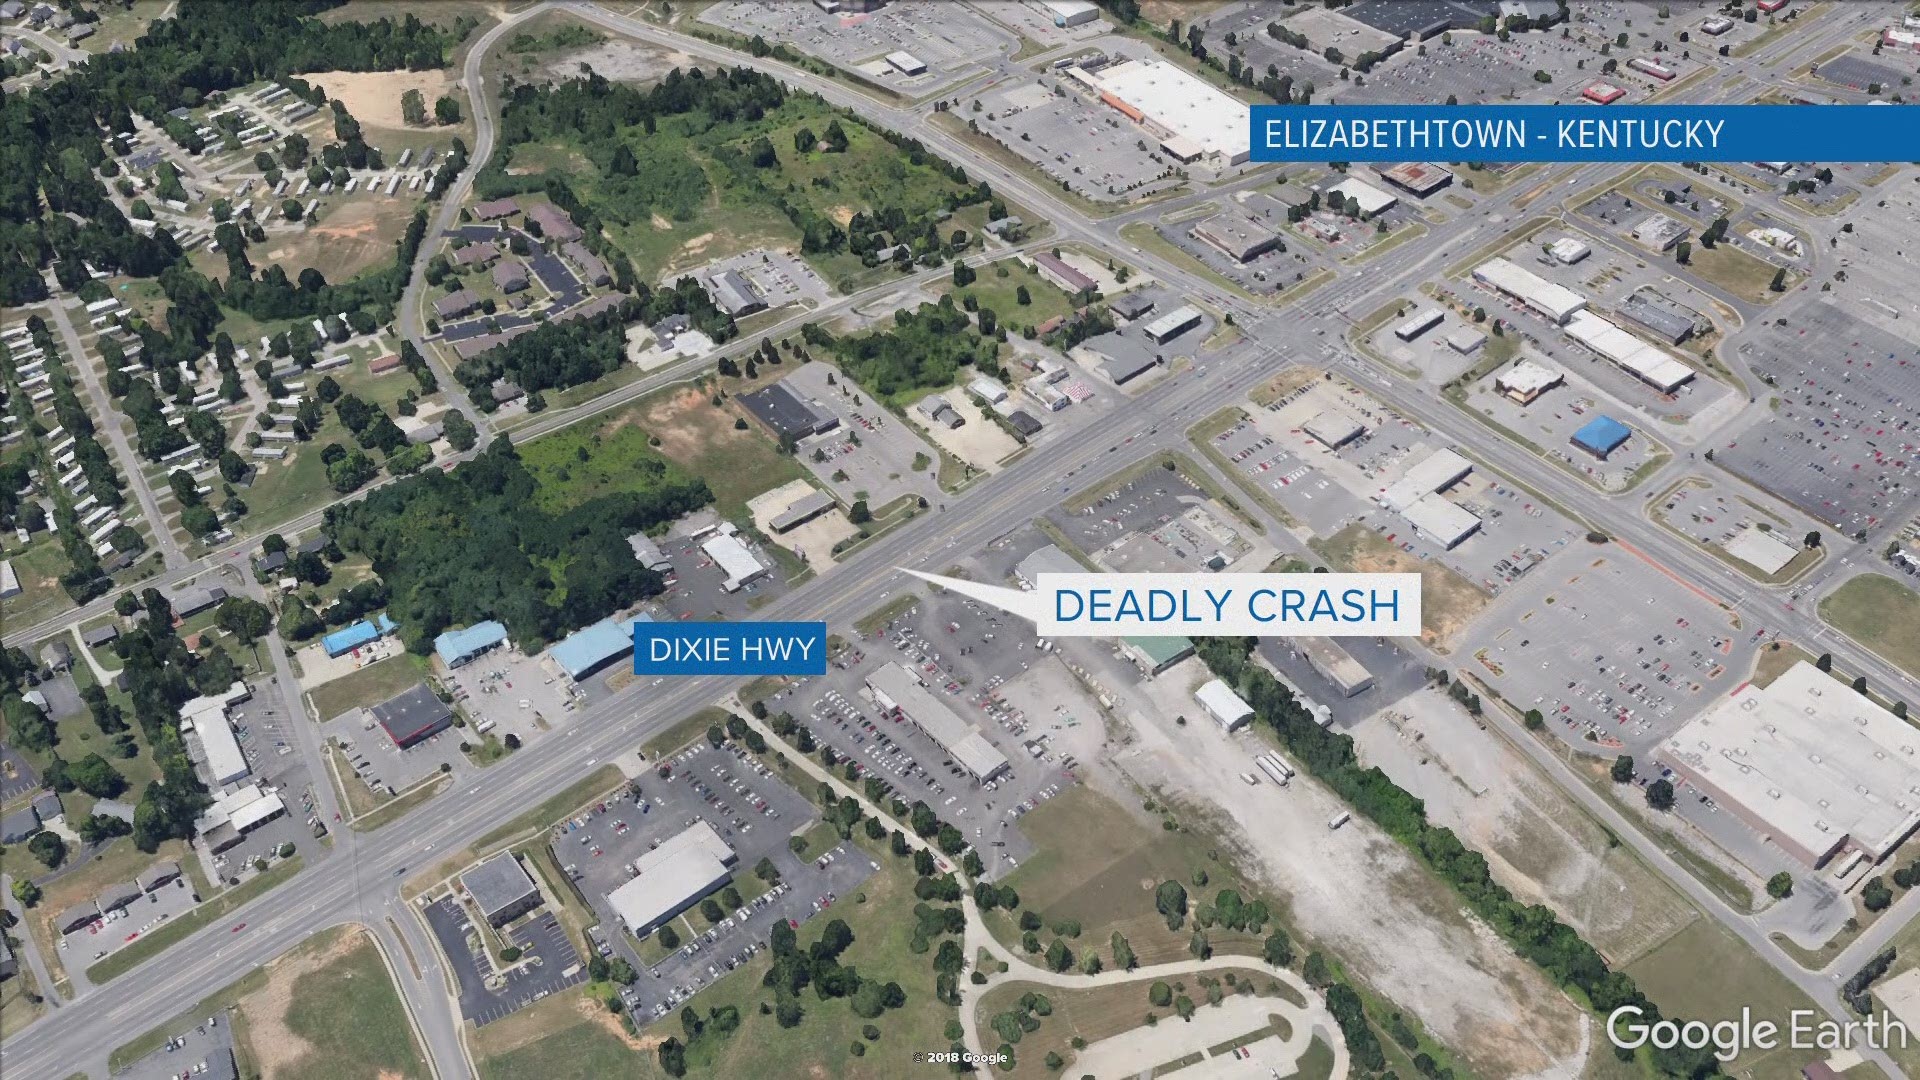 Police are investigating a fatal crash involving a truck and a motorcycle in Elizabethtown